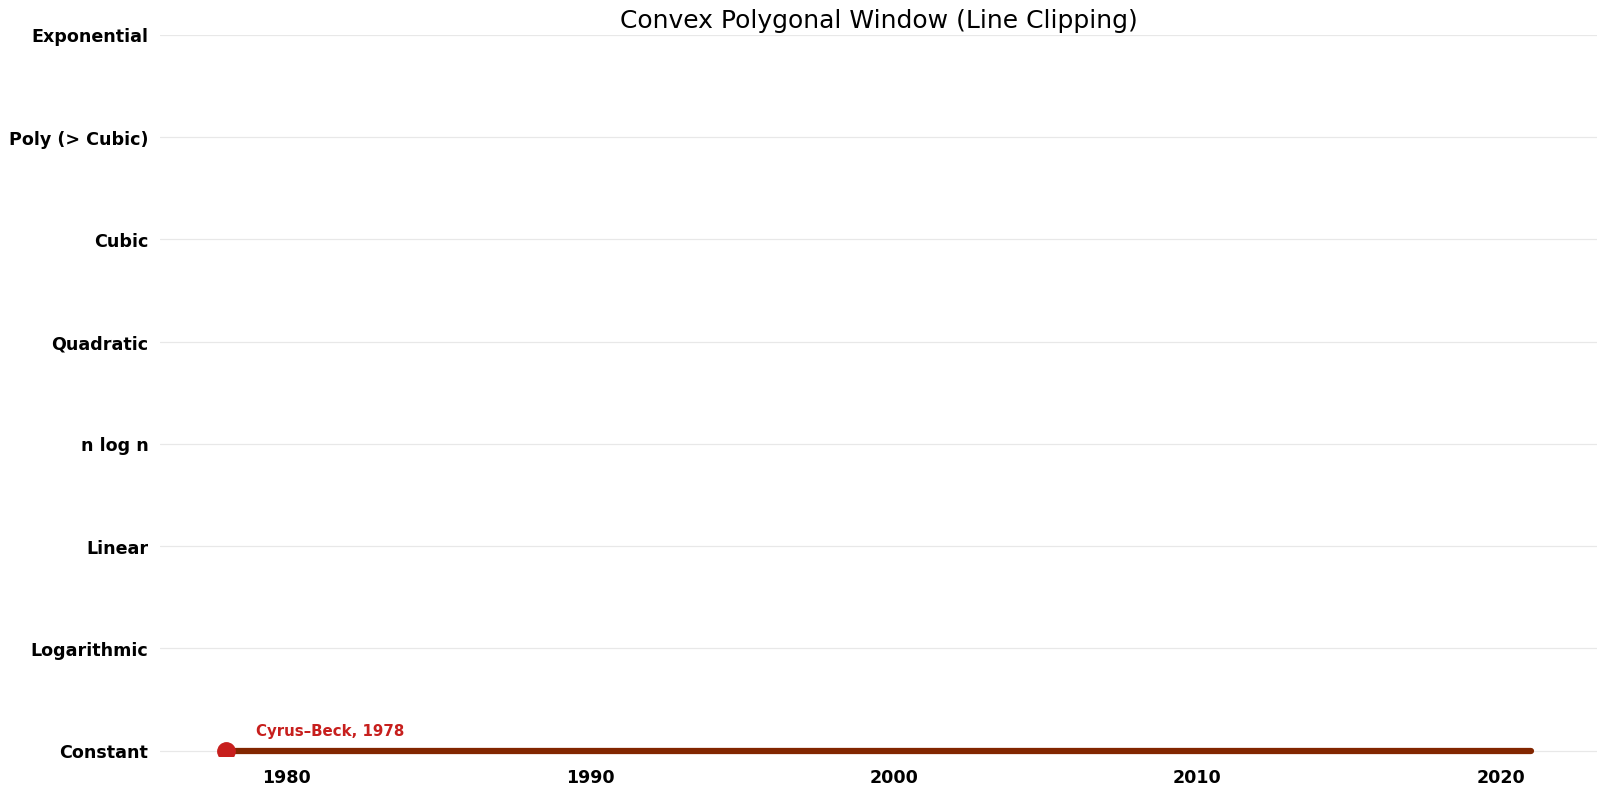 Line Clipping - Convex Polygonal Window - Space.png